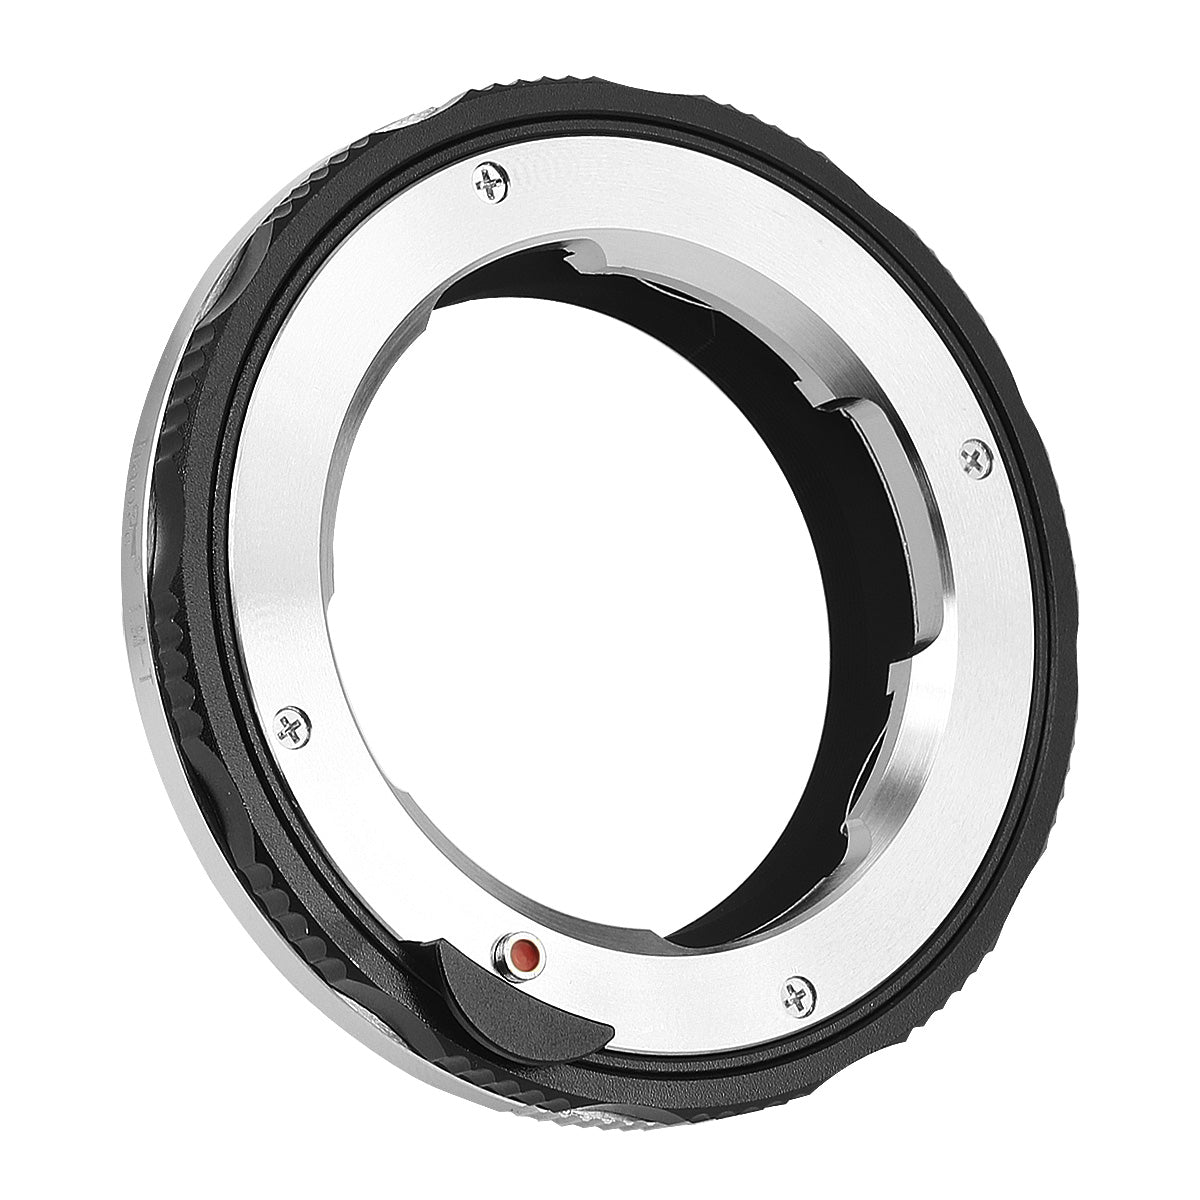 Haoge Macro Focus Lens Mount Adapter for Leica M LM, Zeiss ZM, Voigtlander VM Lens to Leica L Mount Camera Such as T, Typ 701, Typ701, TL, TL2, CL (2017), SL, Typ601, Panasonic S1 / S1R / S1H Copper